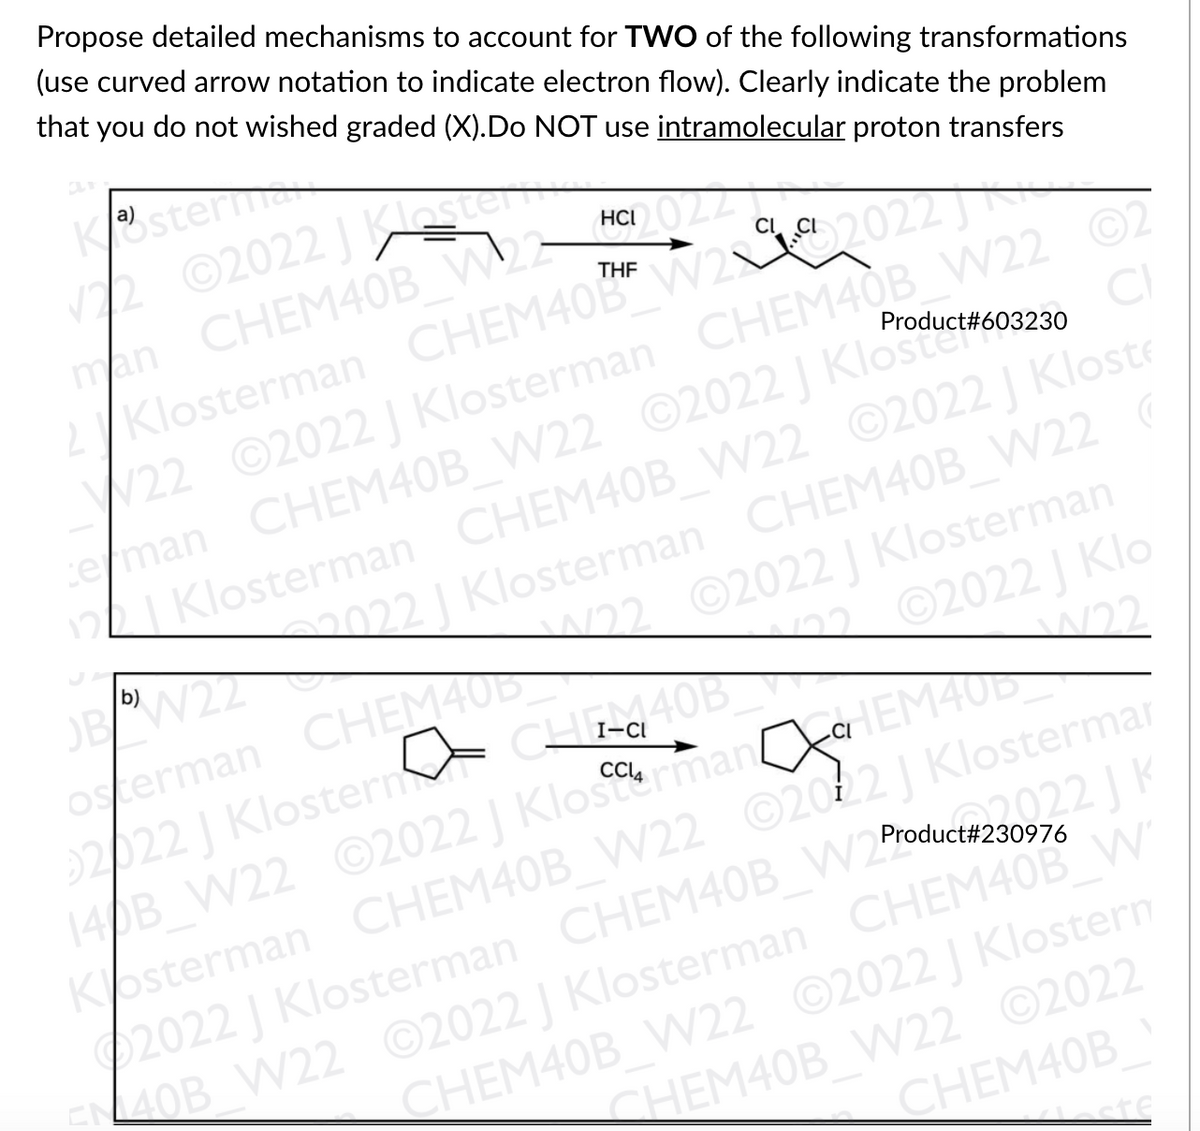 Propose detailed mechanisms to account for TWO of the following transformations
(use curved arrow notation to indicate electron flow). Clearly indicate the problem
that you do not wished graded (X).Do NOT use intramolecular proton transfers
Kster
12 ©2022 J a
man CHEM40B W23
2/Klosterman CHEM40B" W2 202
HCI
THE
22
V22 ©2022 | Klosterman CHEM40B W22
eman CHEM40B_W22 ©2022 J Klostere
12LI Klosterman CHEM40B W22 ©2022 | Kloste
22 Klosterman CHEM40B_W22 (
W22 ©2022 | Klosterman
2022 J Klo
W22
Product#603230
OBW22
osterman CHEM40D
22022 J Klosterm
140B W22 ©2022 | Klostorman
Kosterman CHEM40B_WV22 ©2022| Klostermar
2022 J Klosterman CHEM40B W25
ELOB W22 ©2022 | Klosterman CHEM40B W
b)
122
I-CI
arEM40
HEI
J K
Product#230976
CHEM40B W22 ©2022 Klostern
CHEM40B WN22 ©2022
CHEM40B
